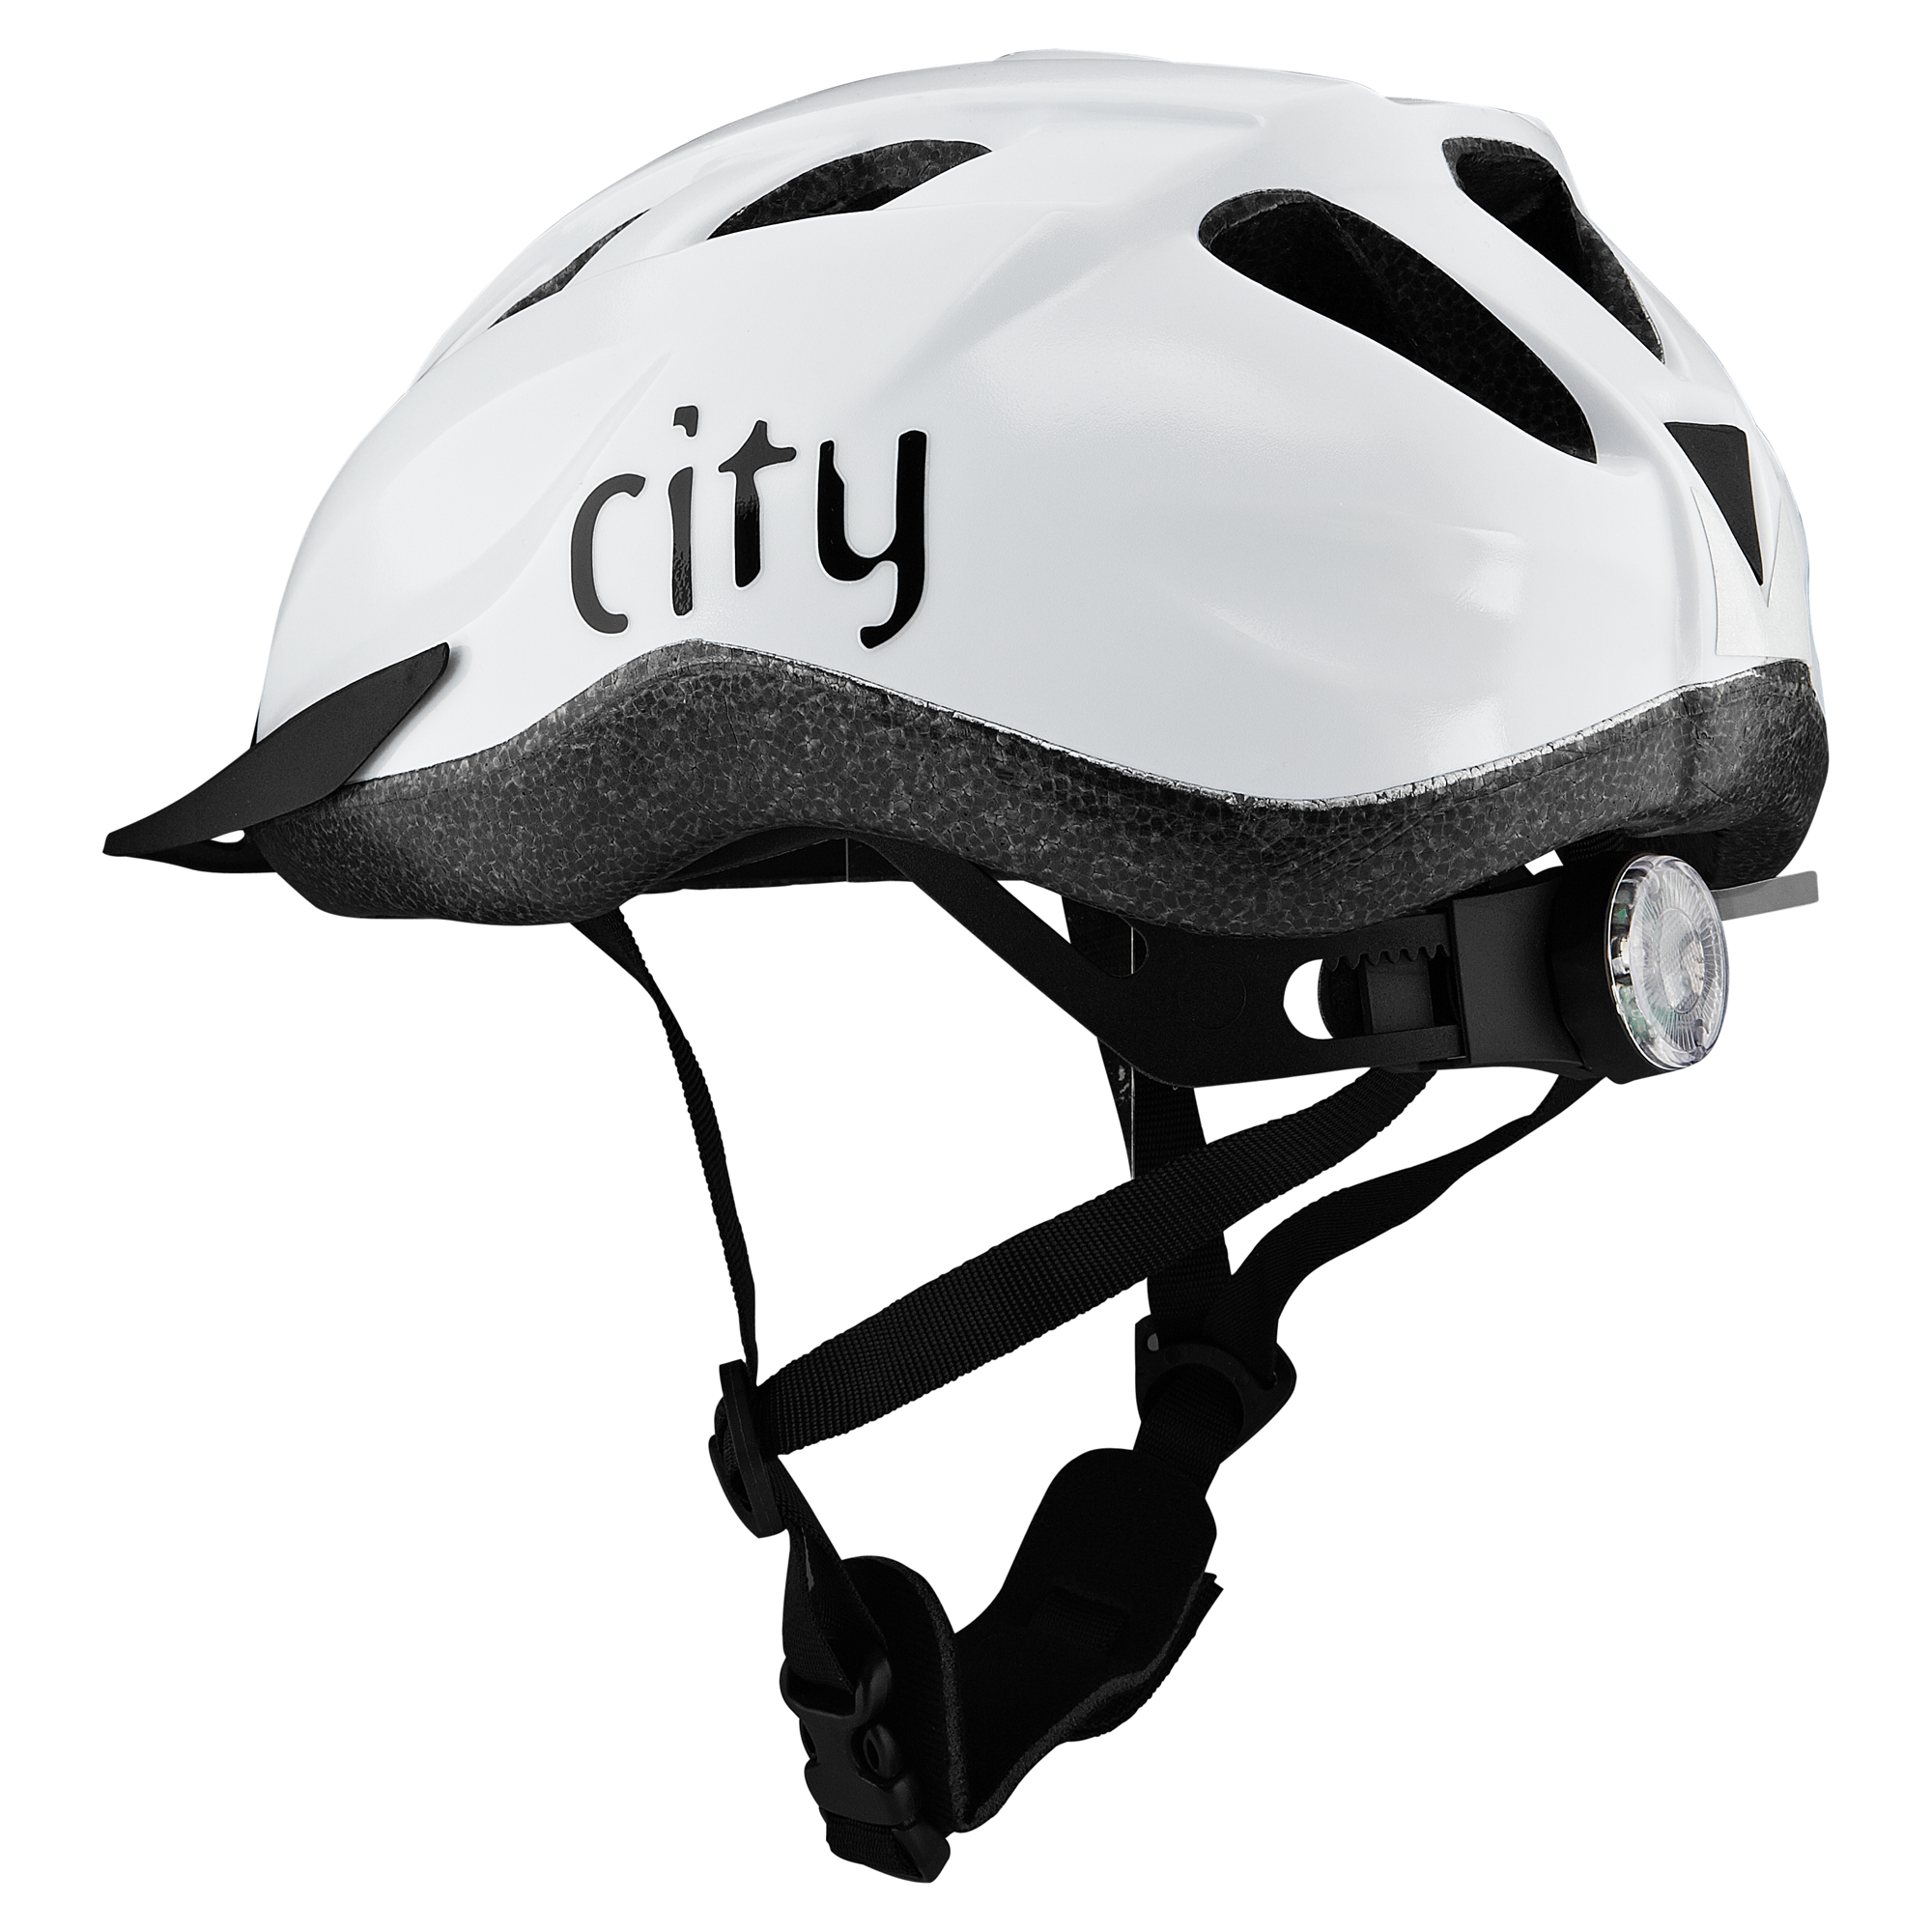 Fischer Fahrradhelm 'Infusion City', weiß, L/XL + product picture